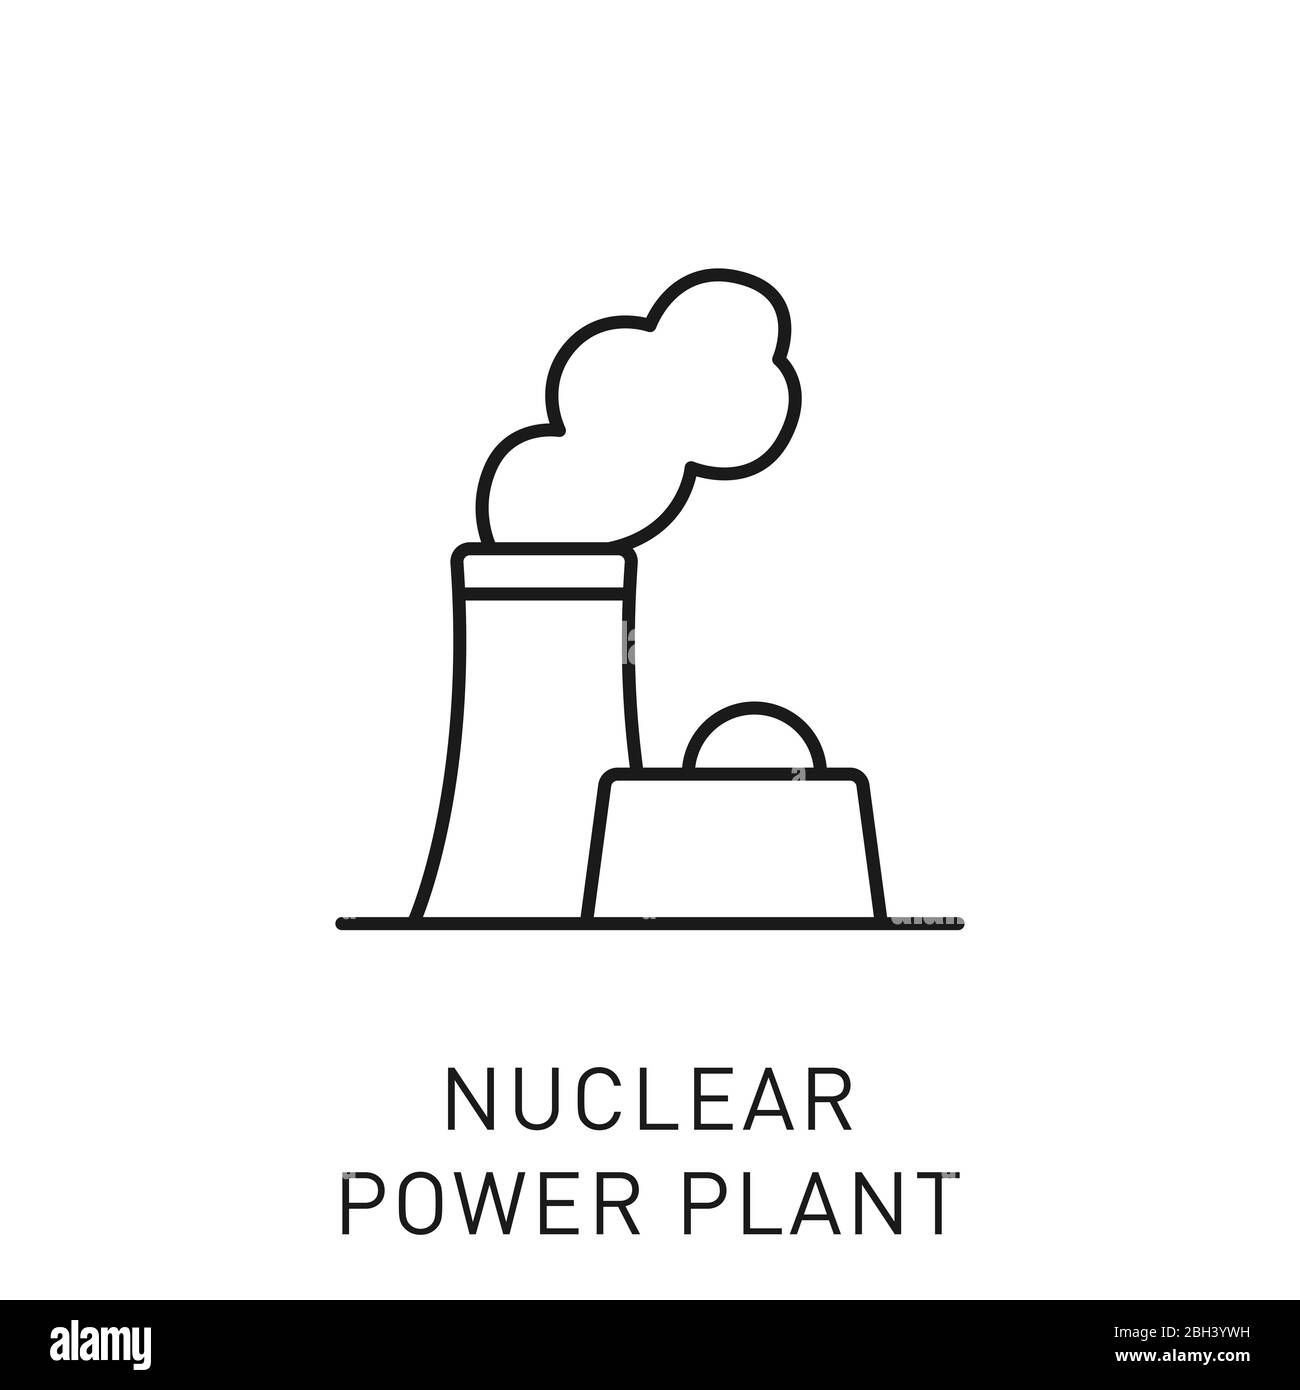 Nuclear power plant thin line icon. Vector illustration. Stock Vector